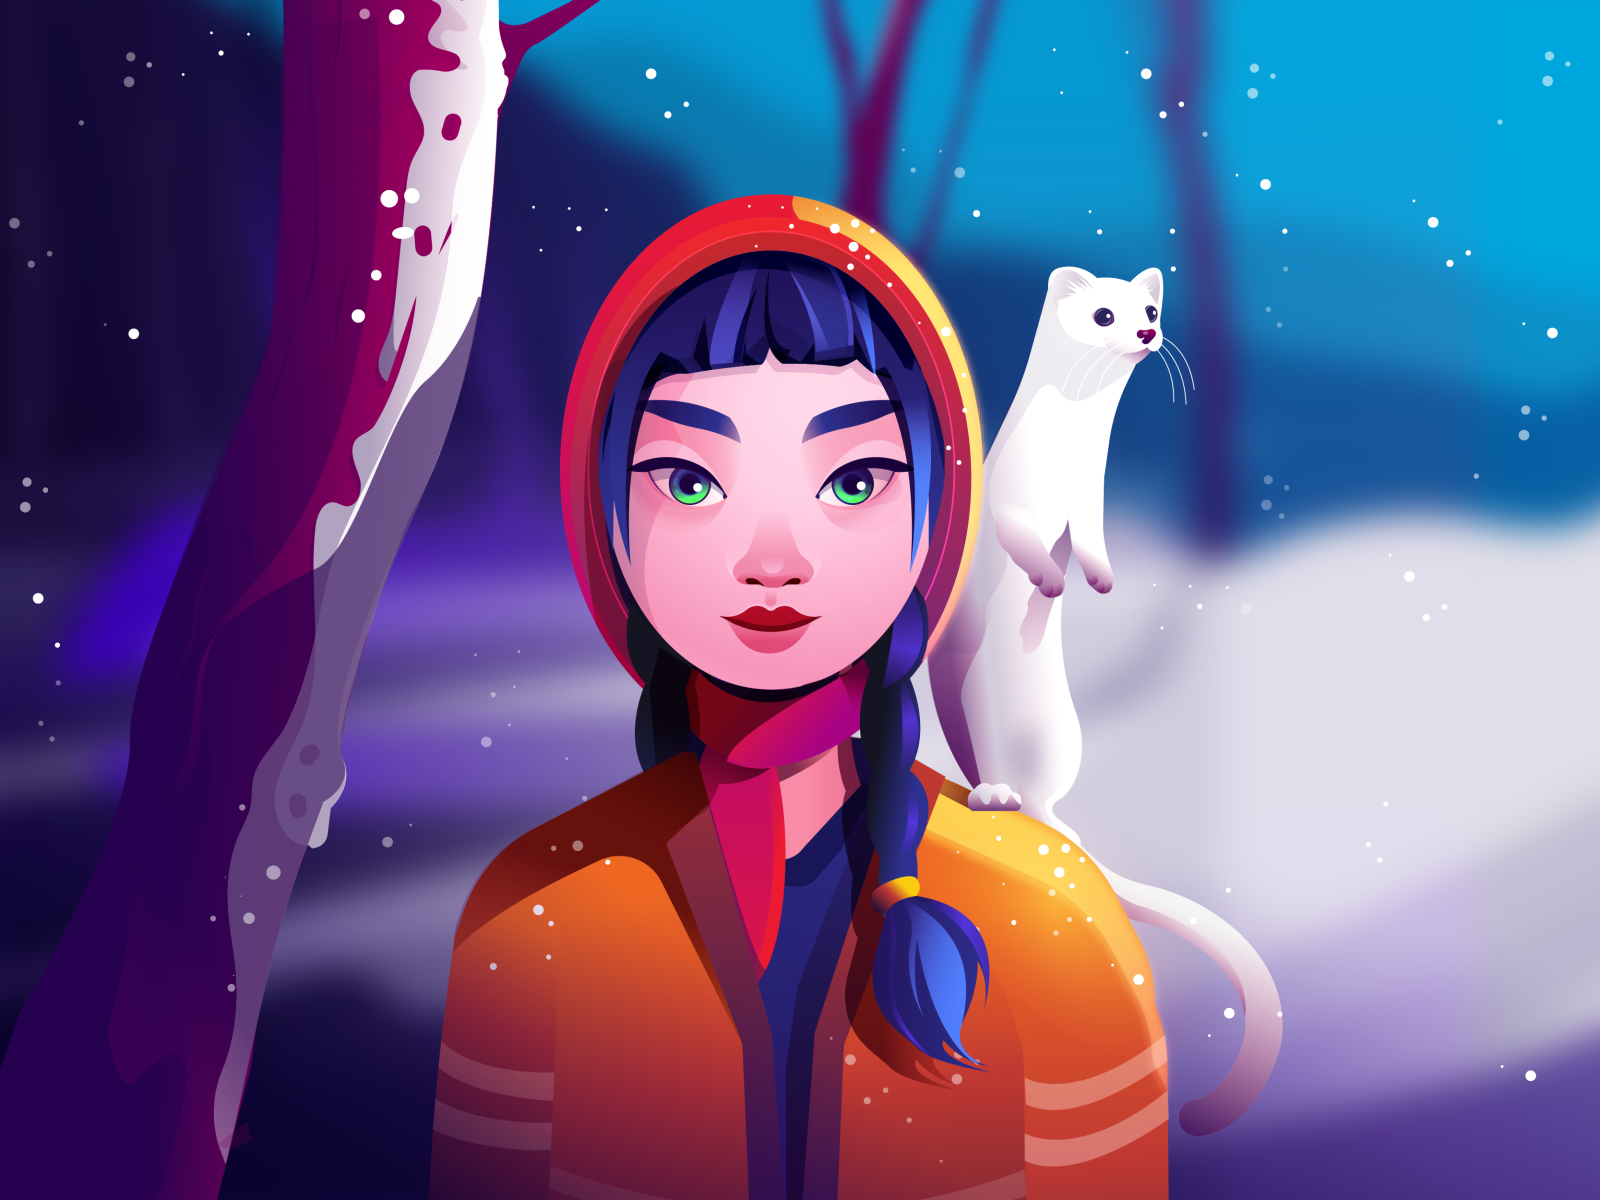 Snow girl and the weasel by Shaf Majeed on Dribbble